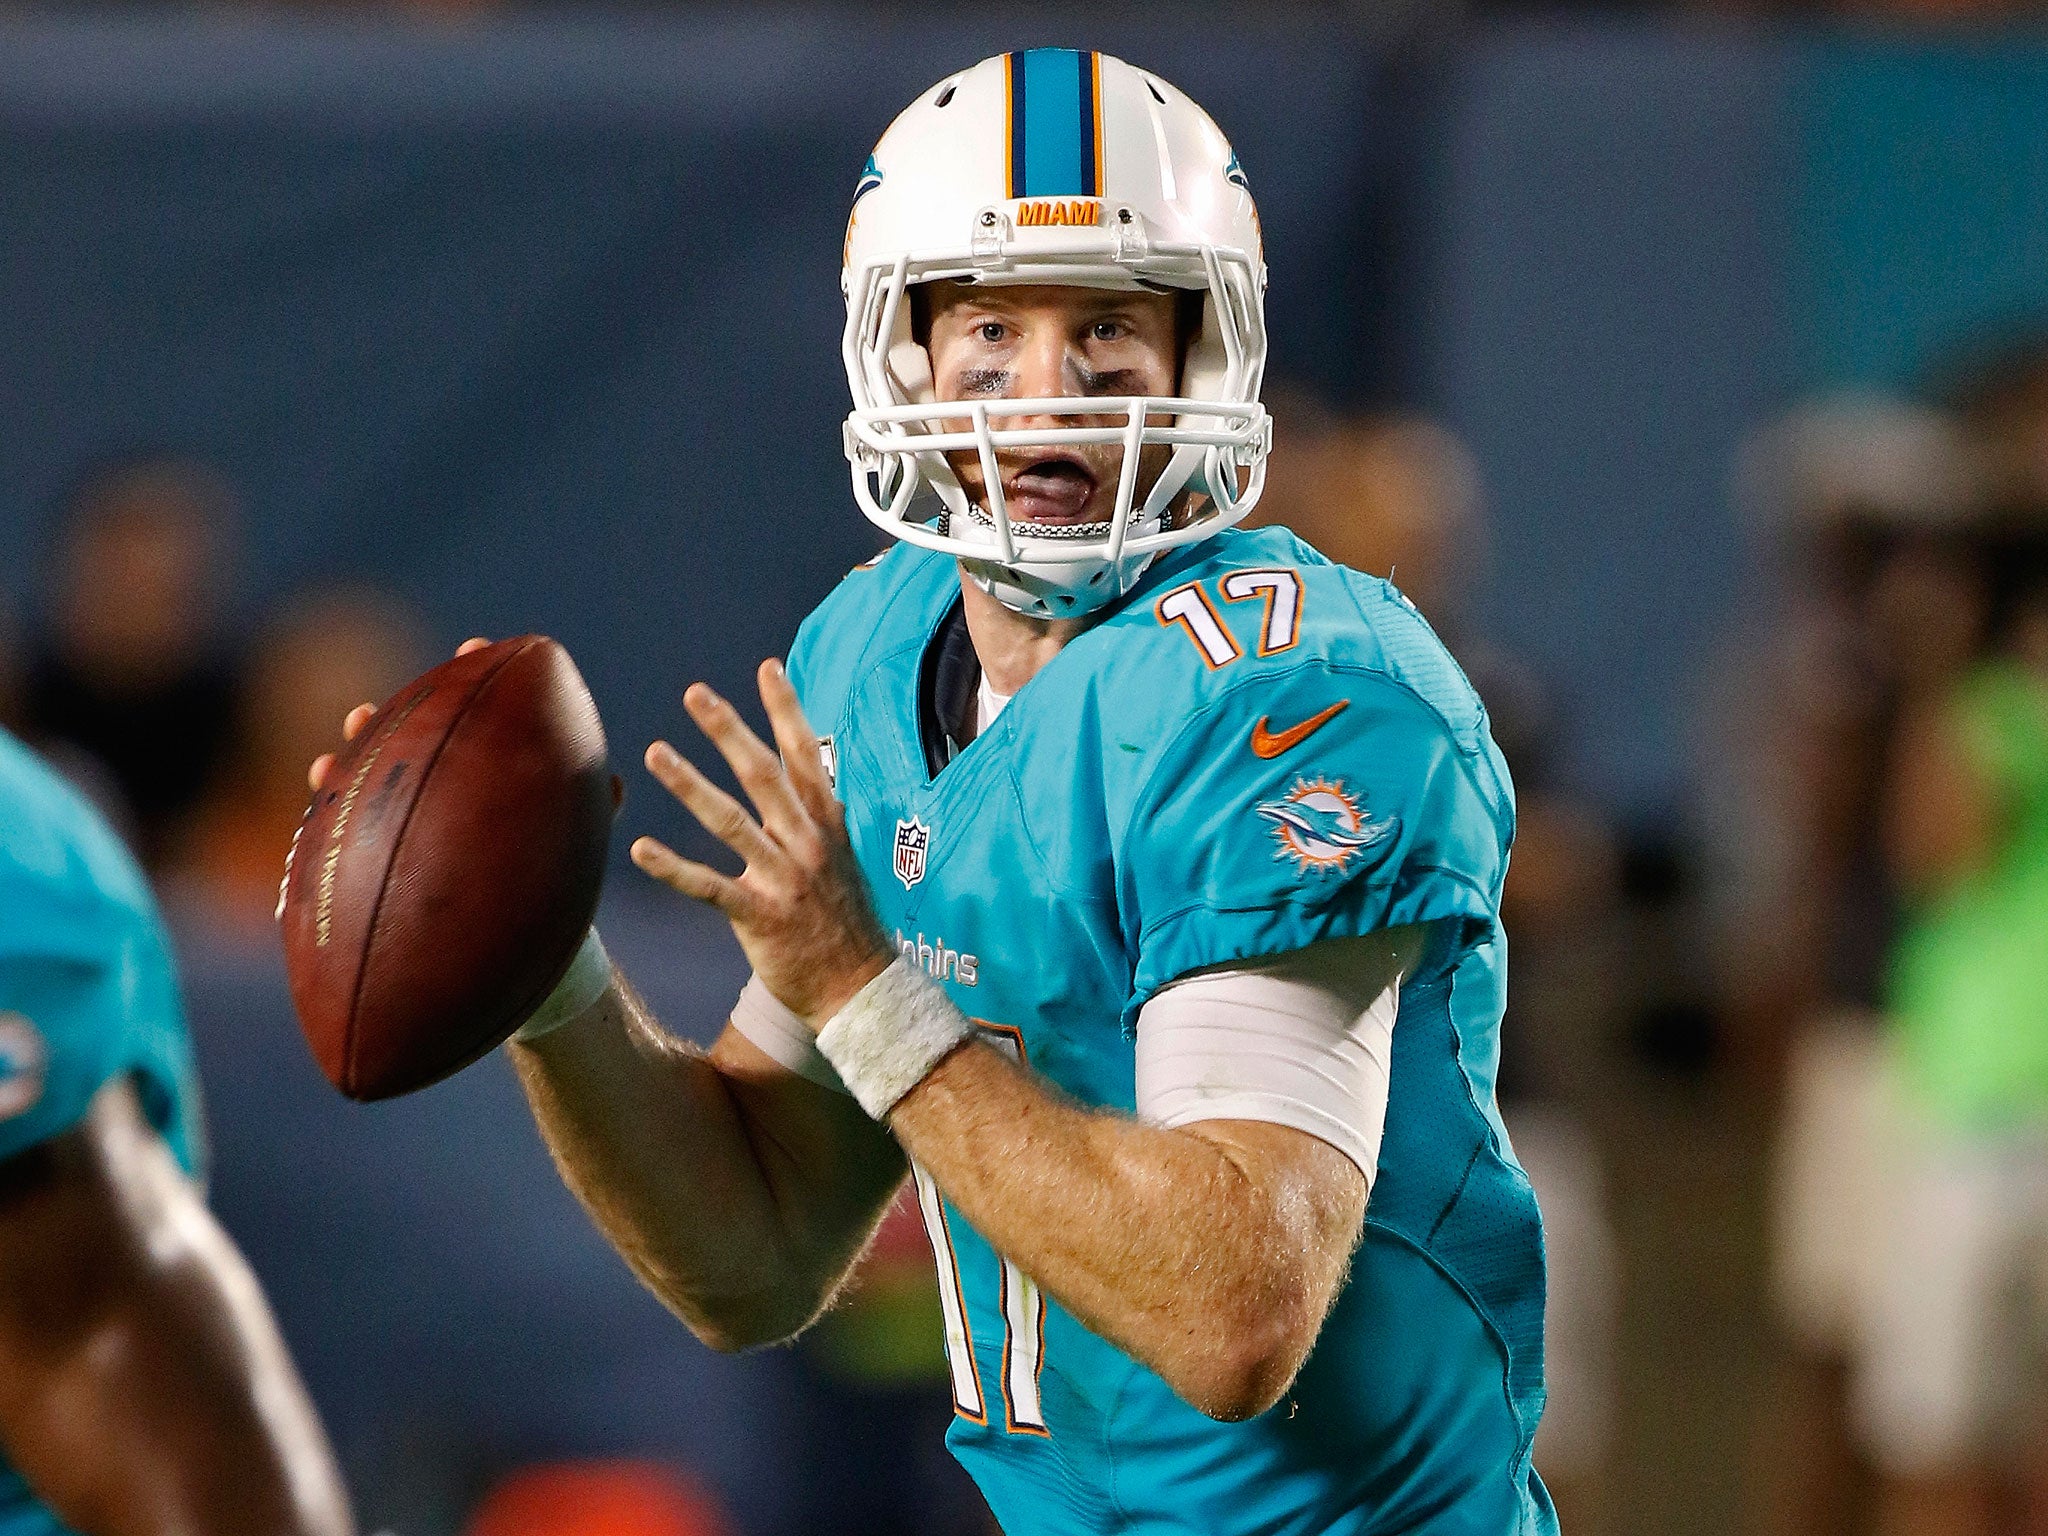 Miami Dolphins quarter-back Ryan Tannehill threw for two touchdowns